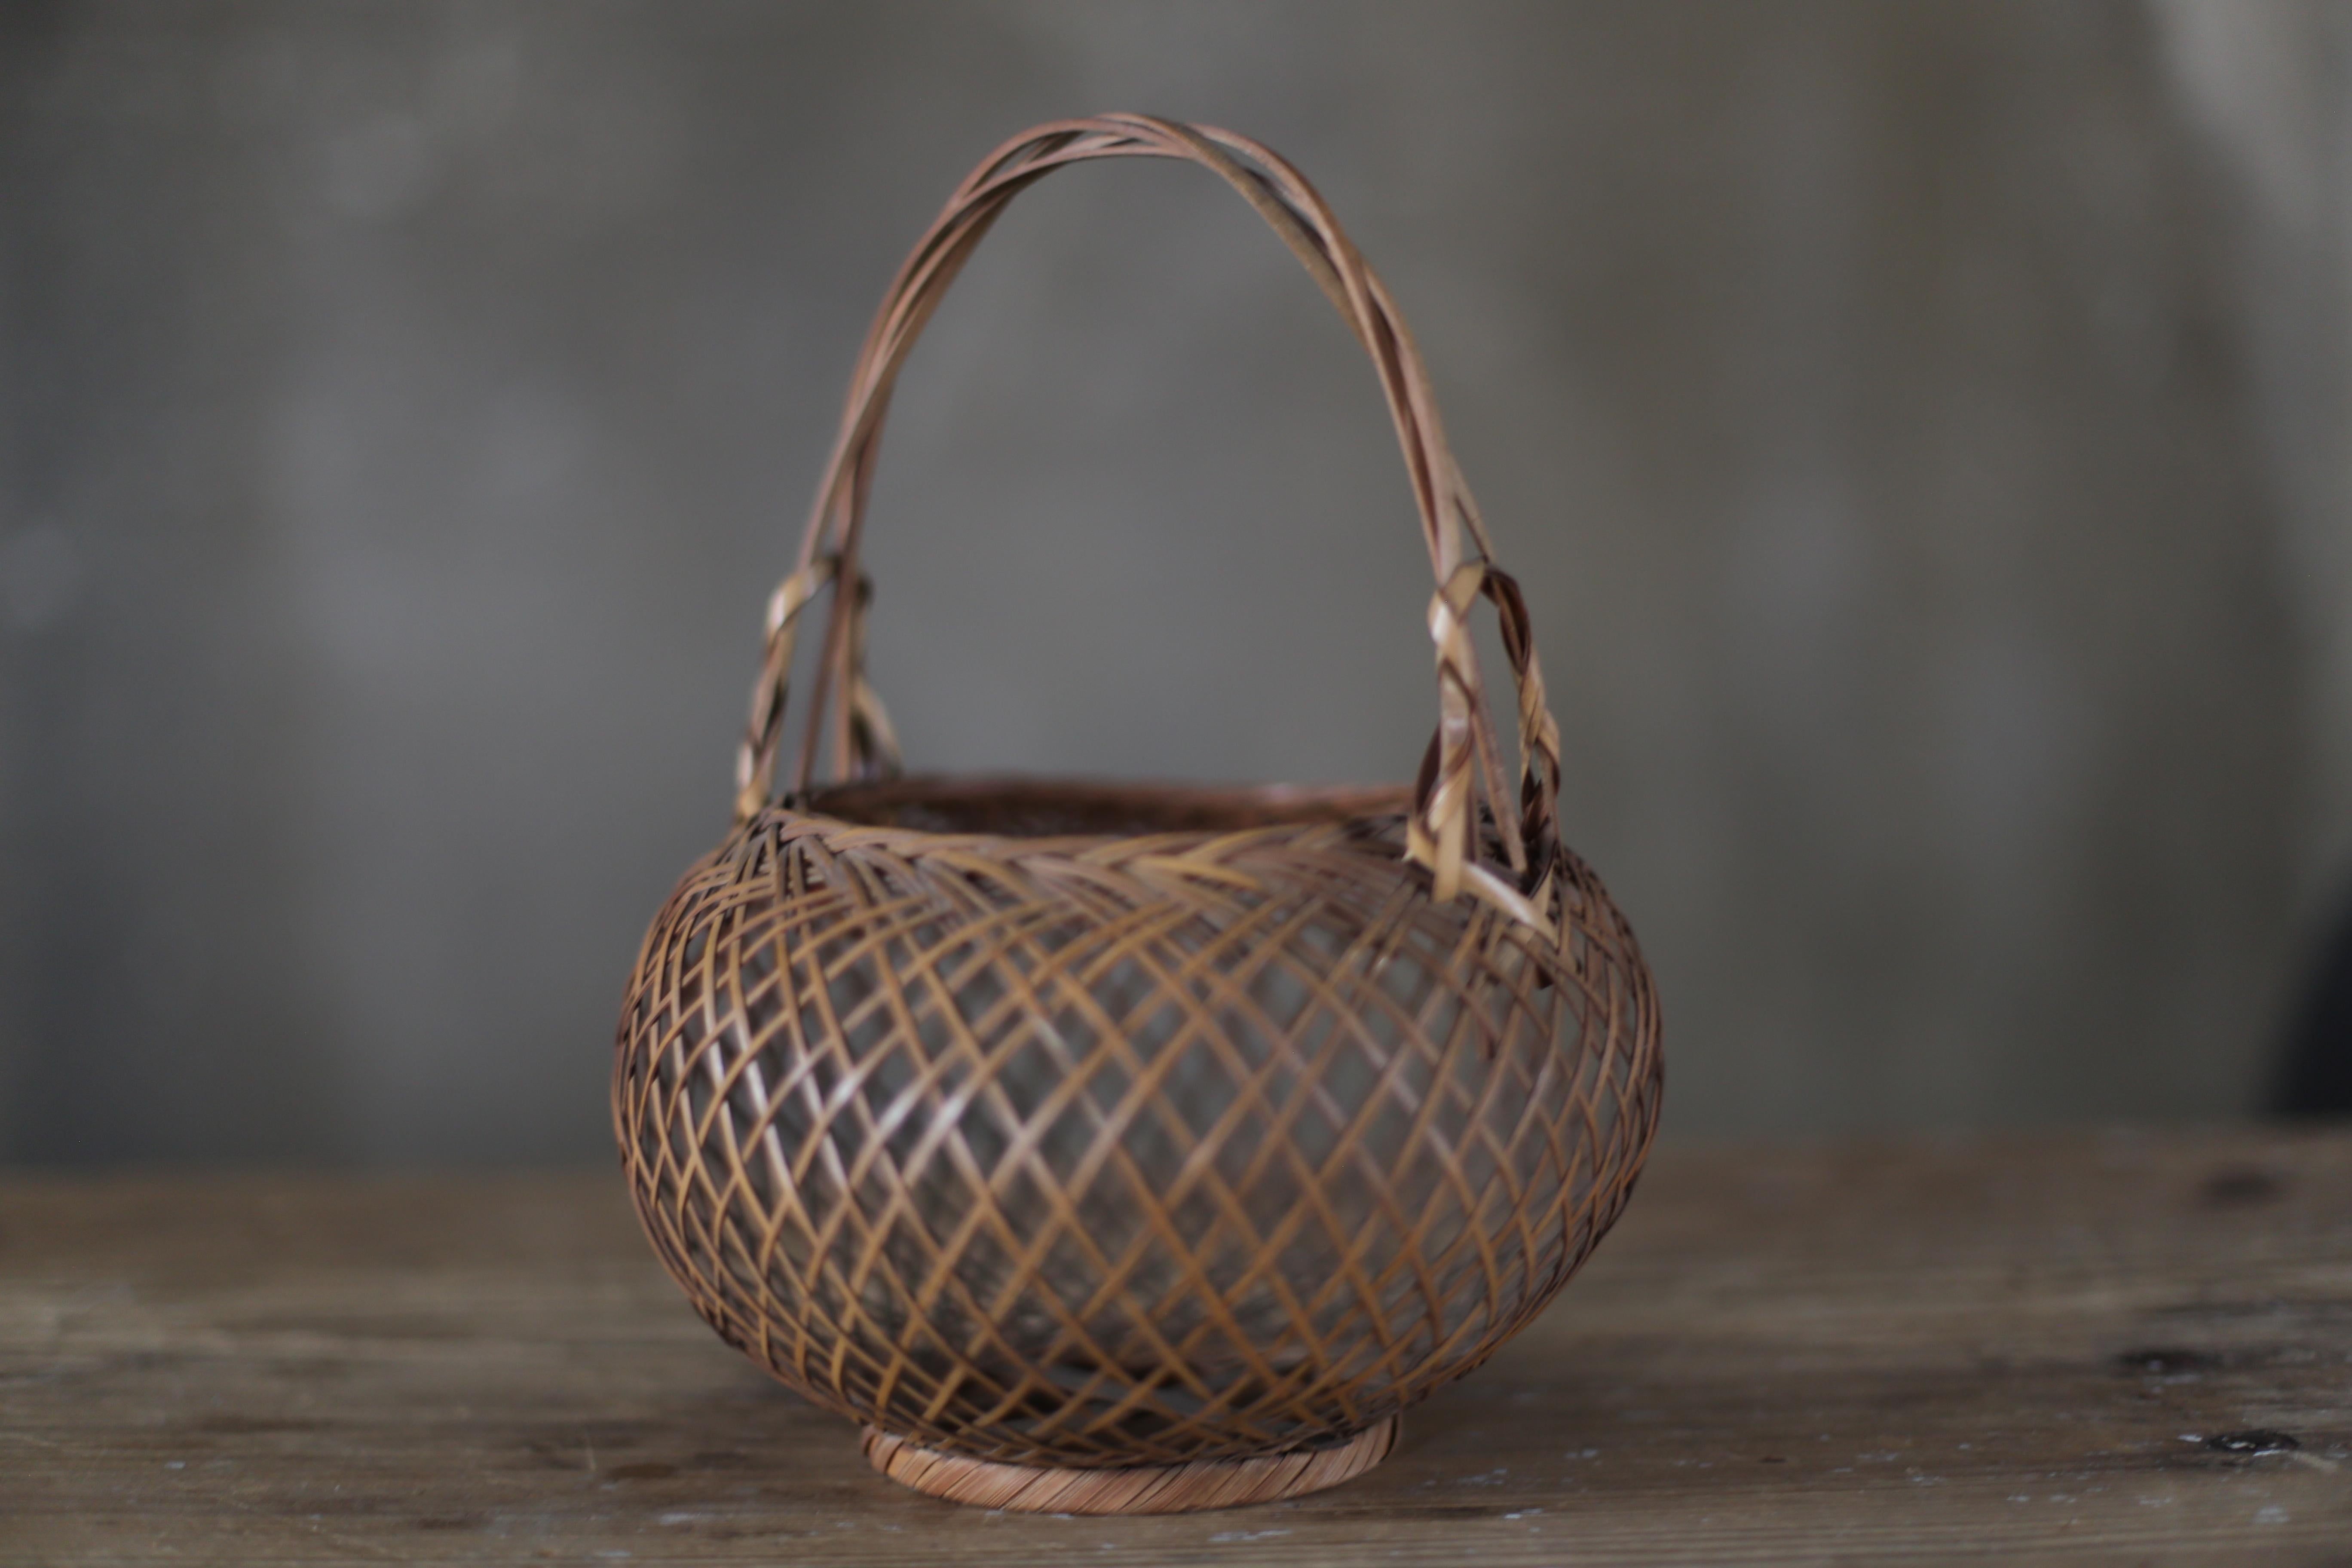 This is a woven bamboo basket made in Japan during the Meiji to Taisho eras (1868-1920).
It is a vase that imitates the shape.

It was hung on the wall or placed on a table to decorate with flowers.

Soot is attached and it is black like